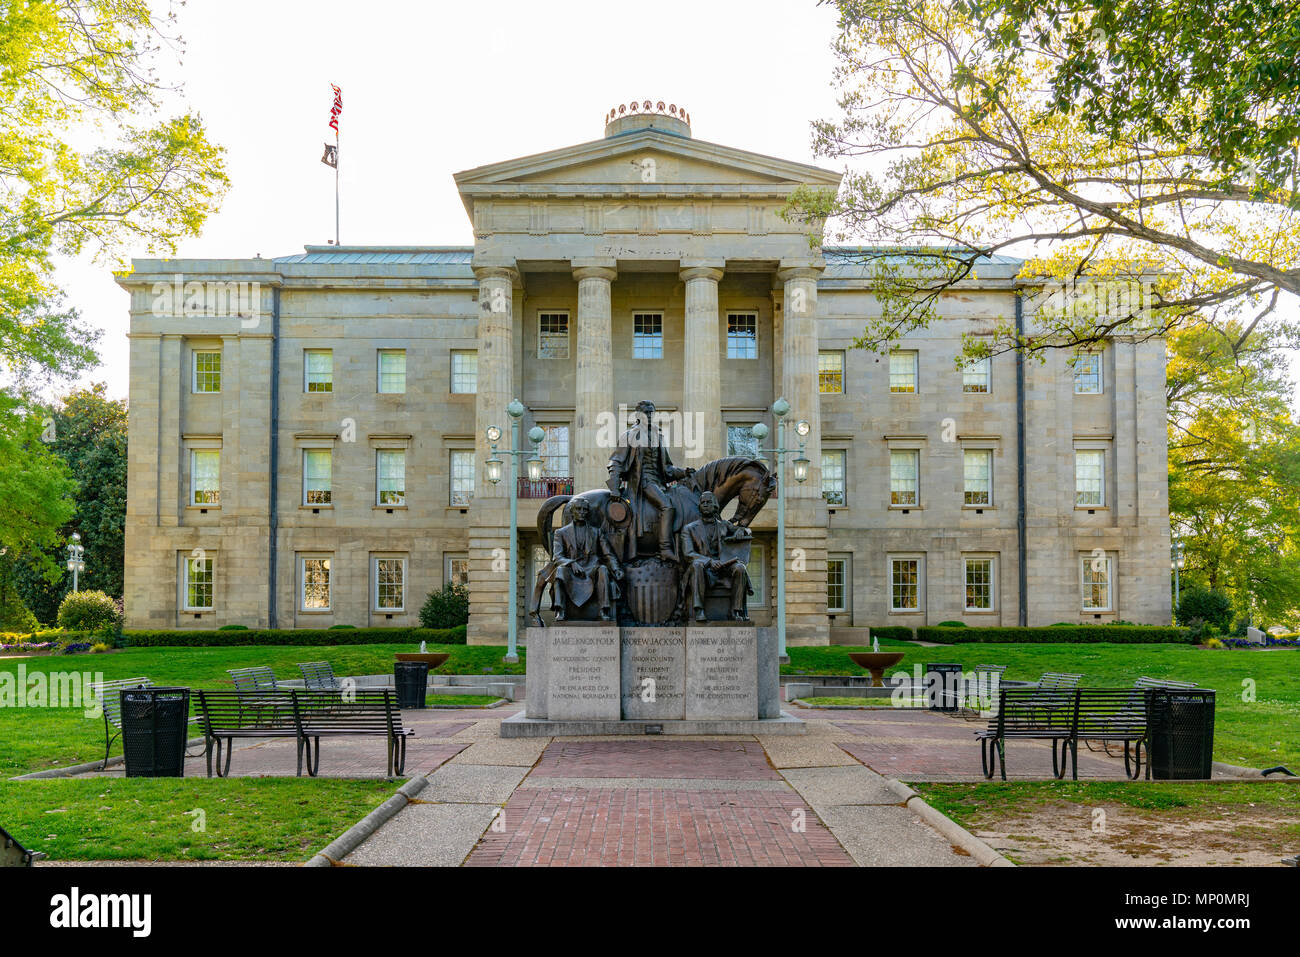 RALEIGH, NC - APRIL 17, 2018: Statue commemorating Presidents James Polk, Andrew Jackson and Andrew Johnson at the North Carolina Capitol Building in  Stock Photo